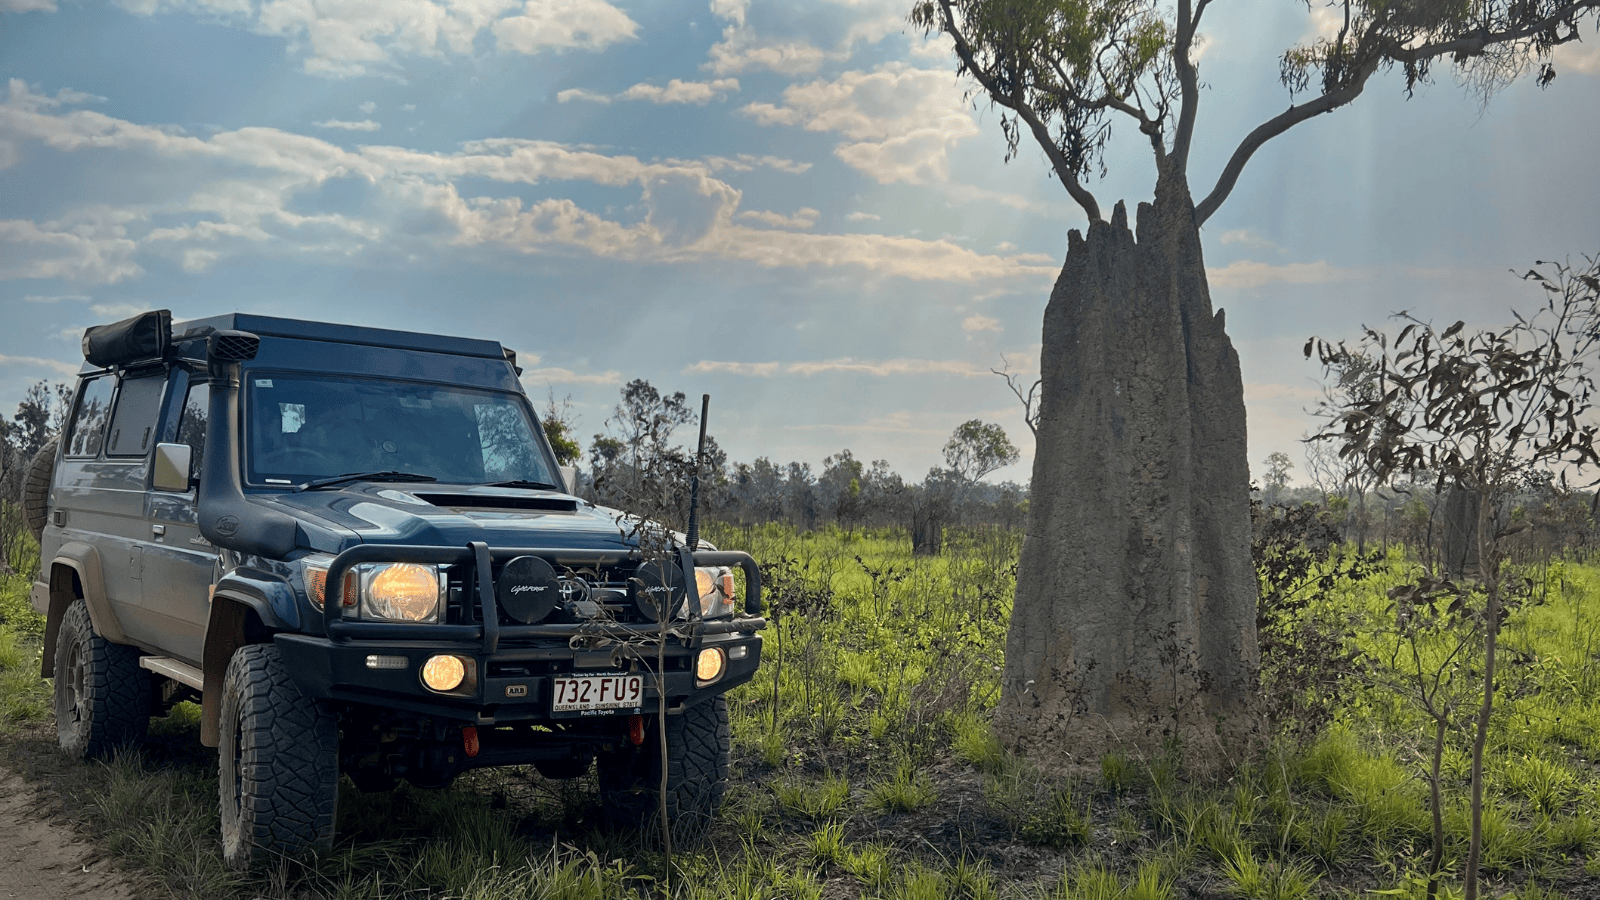 Winter camping Destination4WD Australian made 4x4 free standing awnings and shower awnings